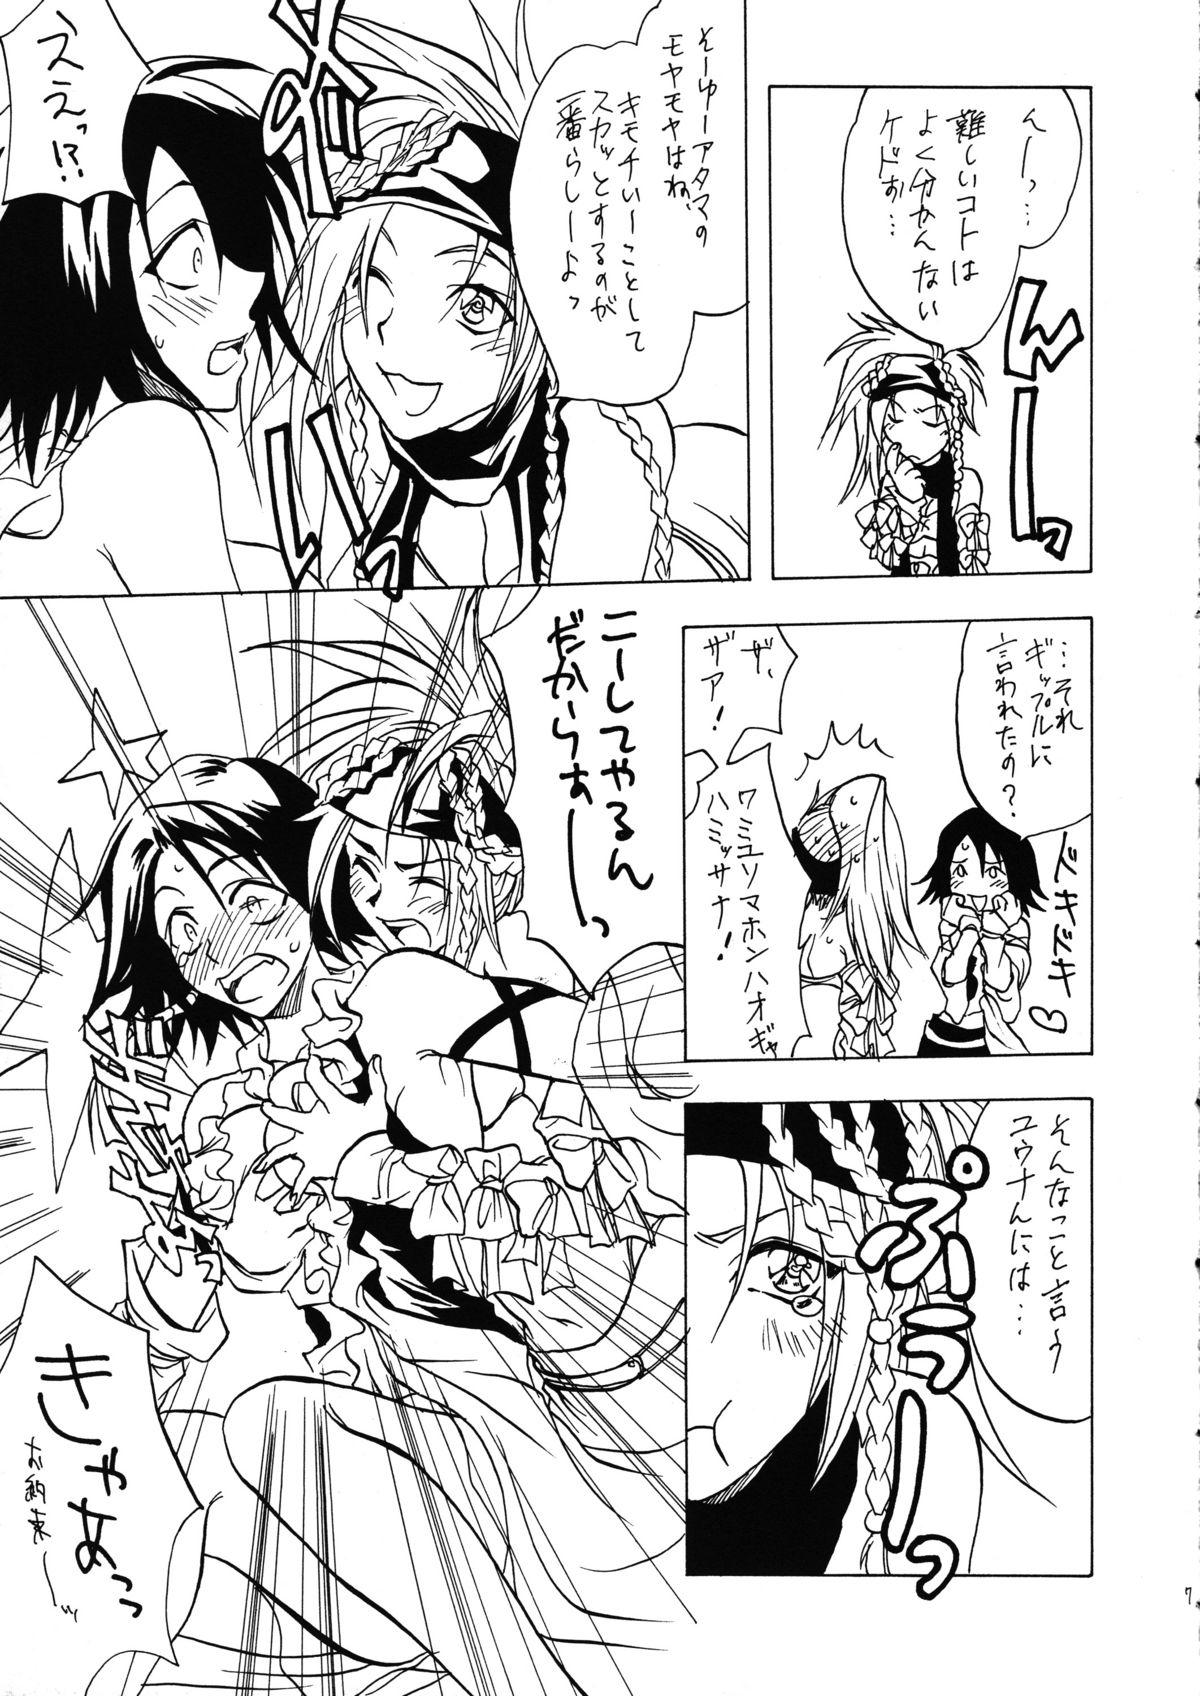 Whipping Sennen No Koi 2 - Final fantasy x-2 Hot Girl Pussy - Page 8